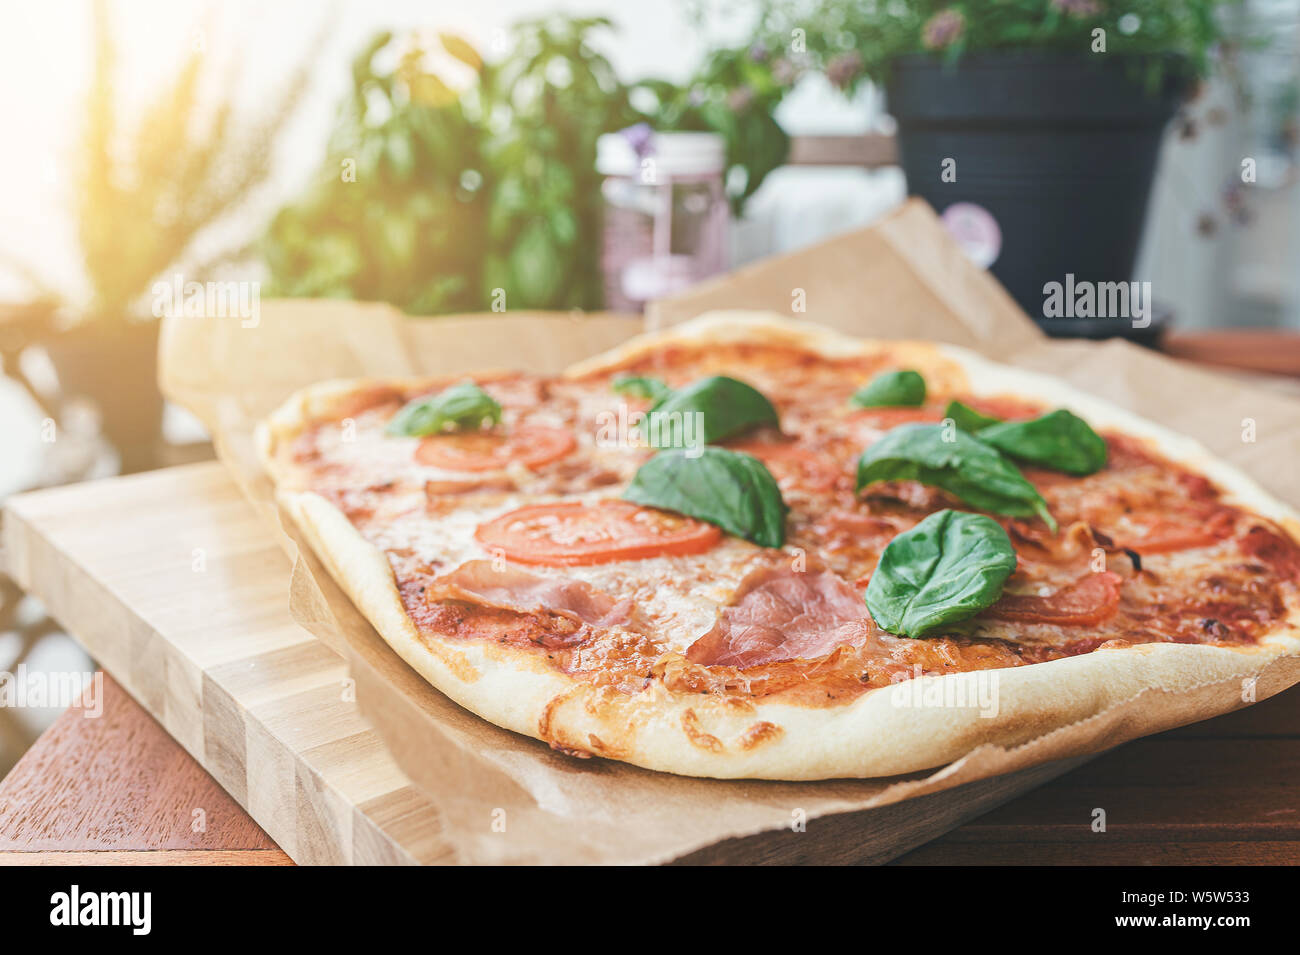 fresh homemade pizza with serrano, sliced tomatoes and fresh basil leaves on wooden table on patio Stock Photo